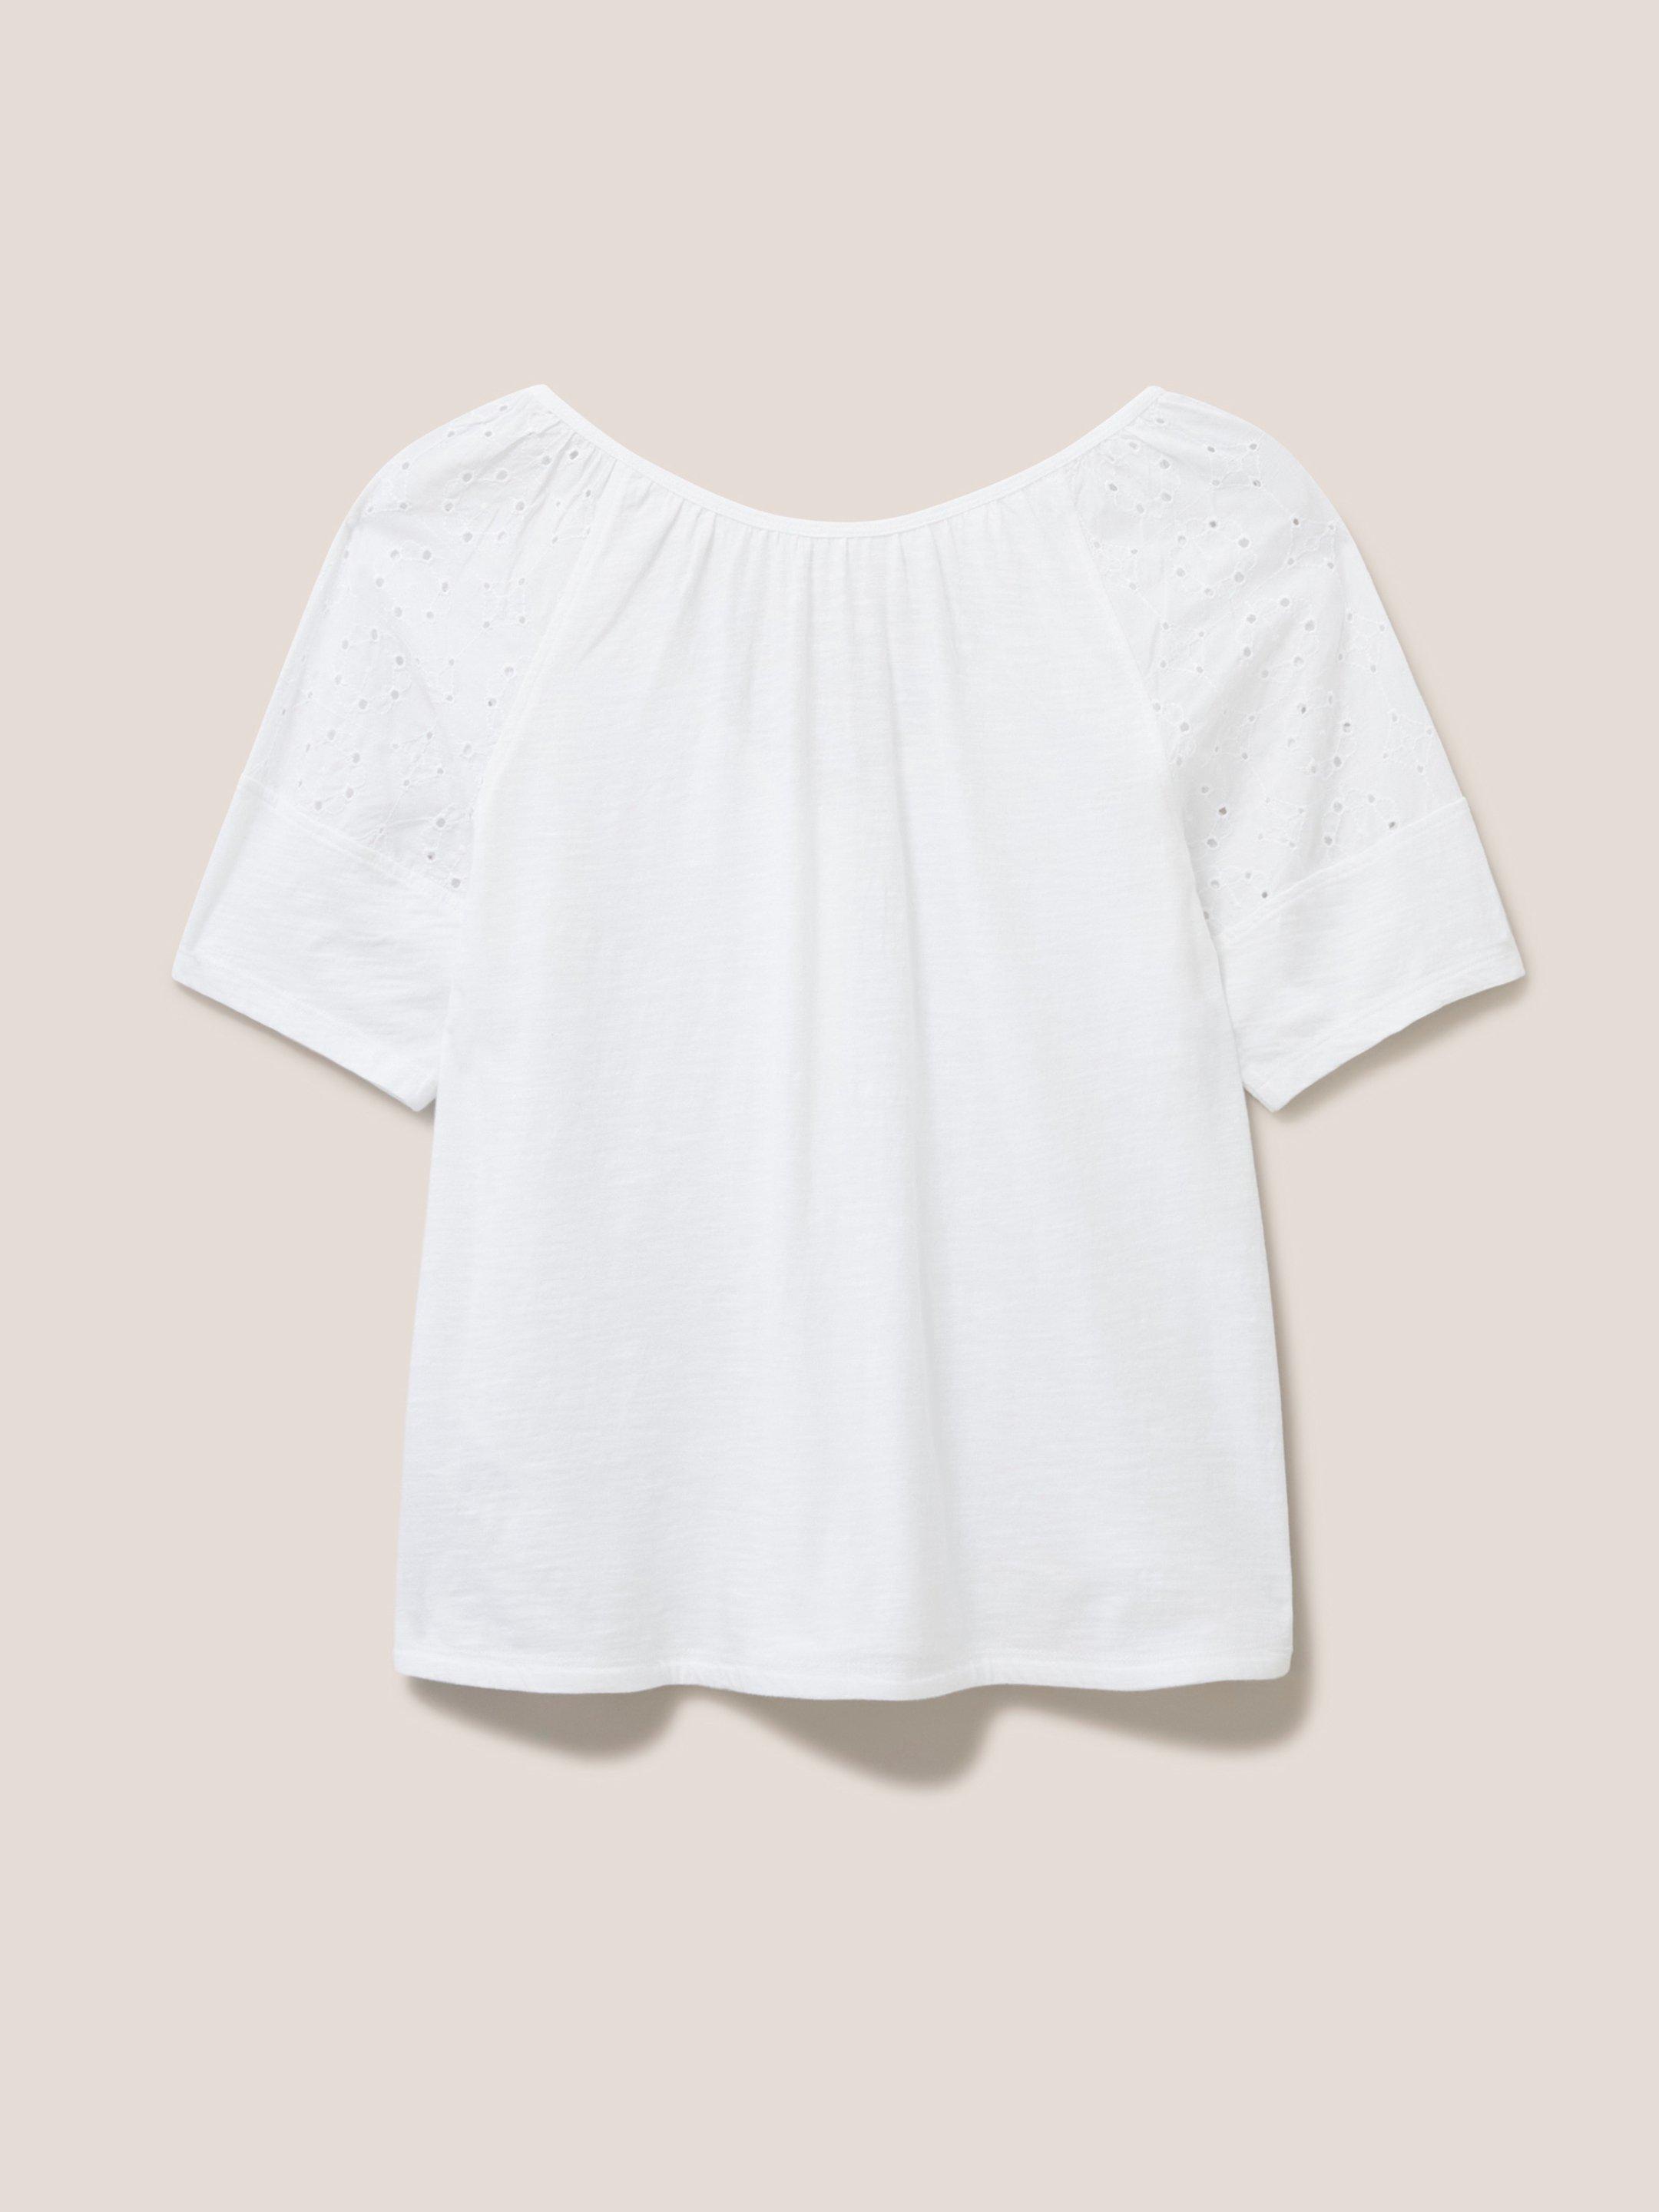 BRODERIE MIX TWO WAY TOP in BRIL WHITE - FLAT BACK